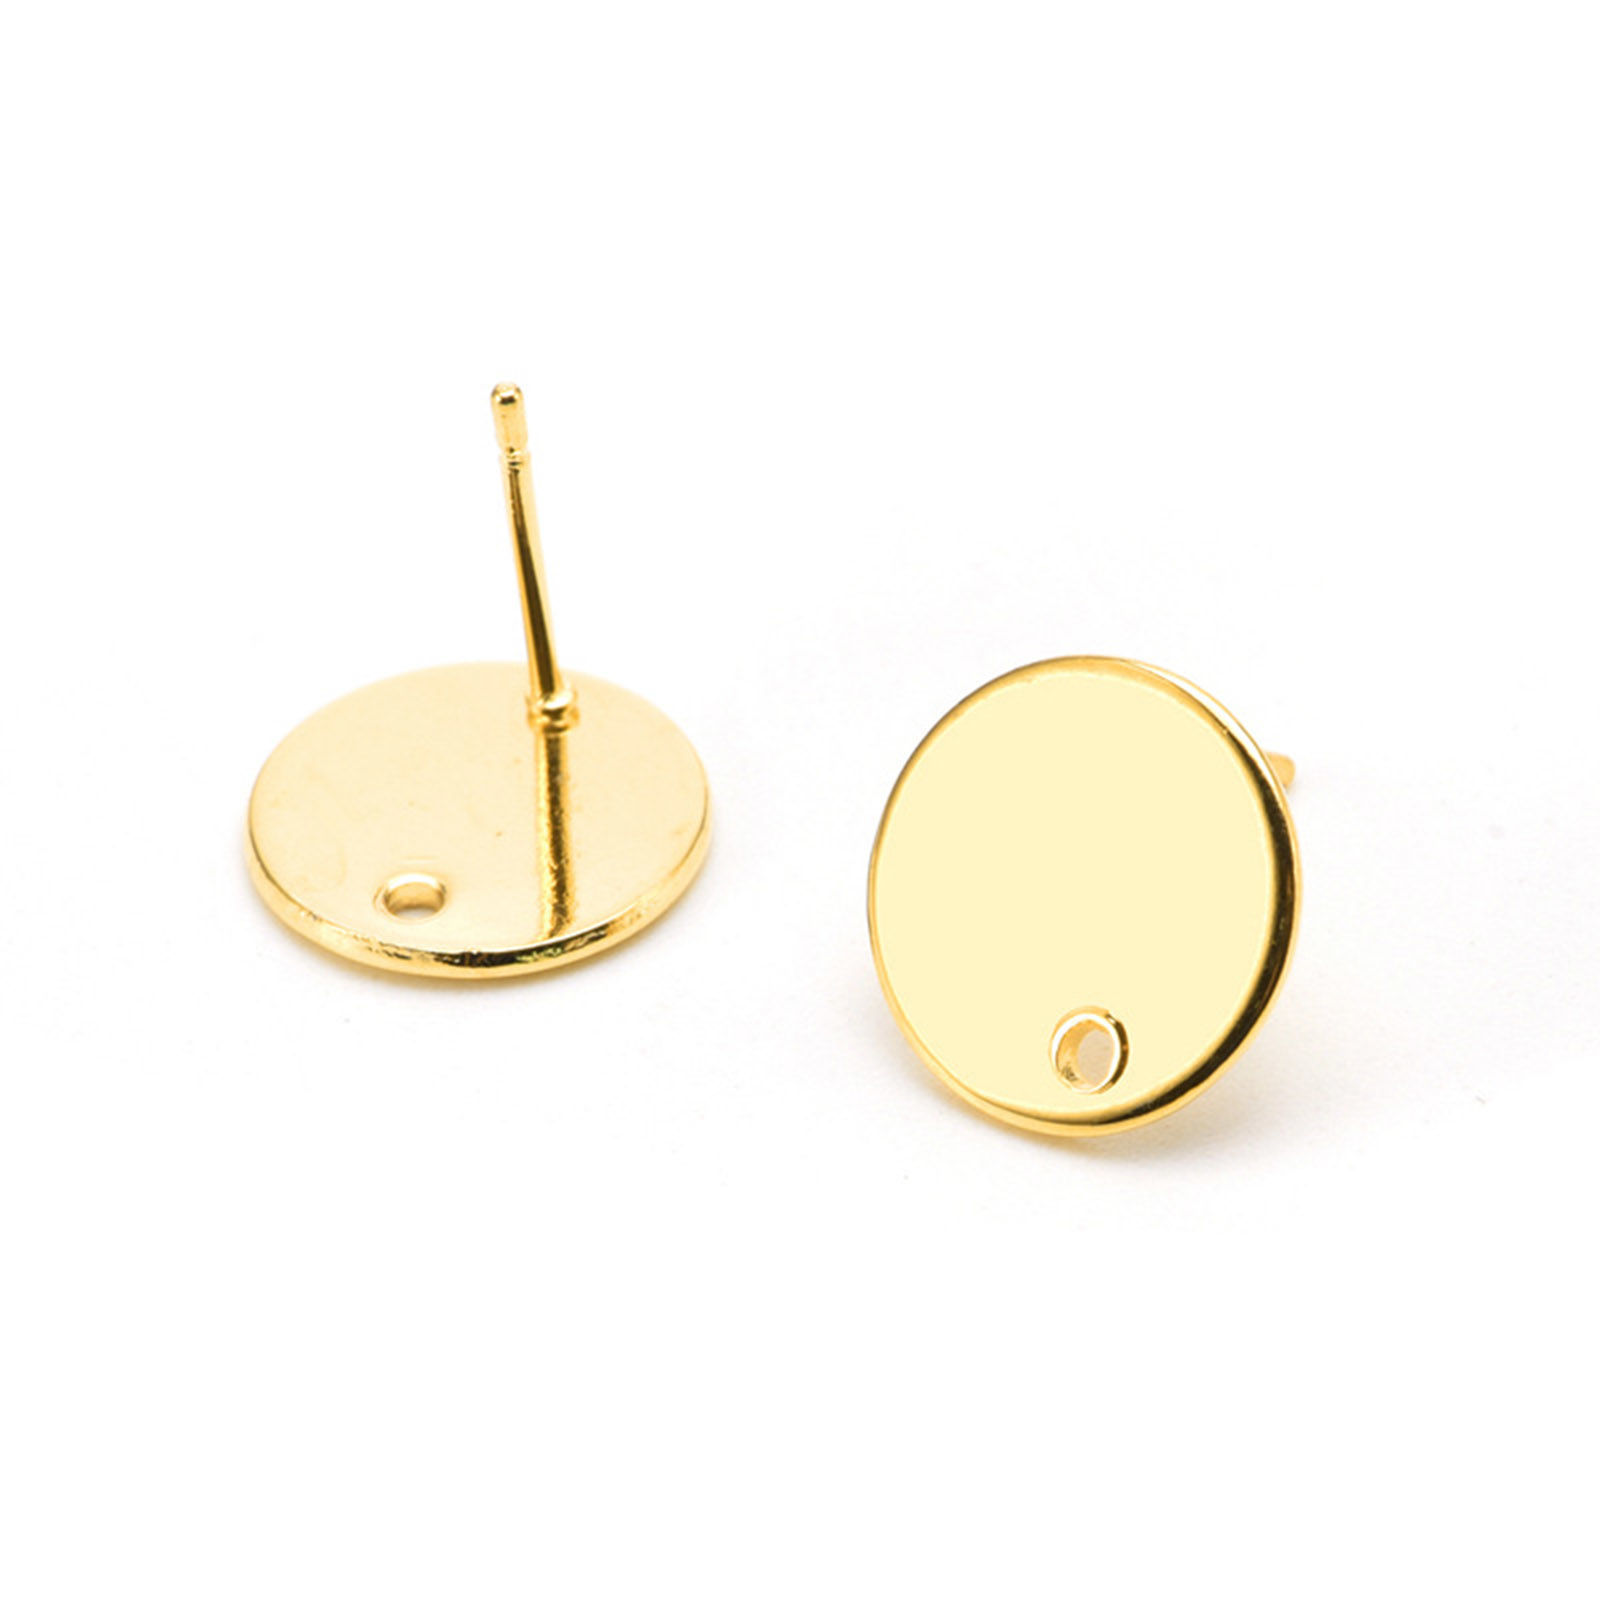 Picture of Stainless Steel Ins Style Ear Post Stud Earrings Round Gold Plated With Loop 10mm Dia., Post/ Wire Size: (20 gauge), 1 Piece